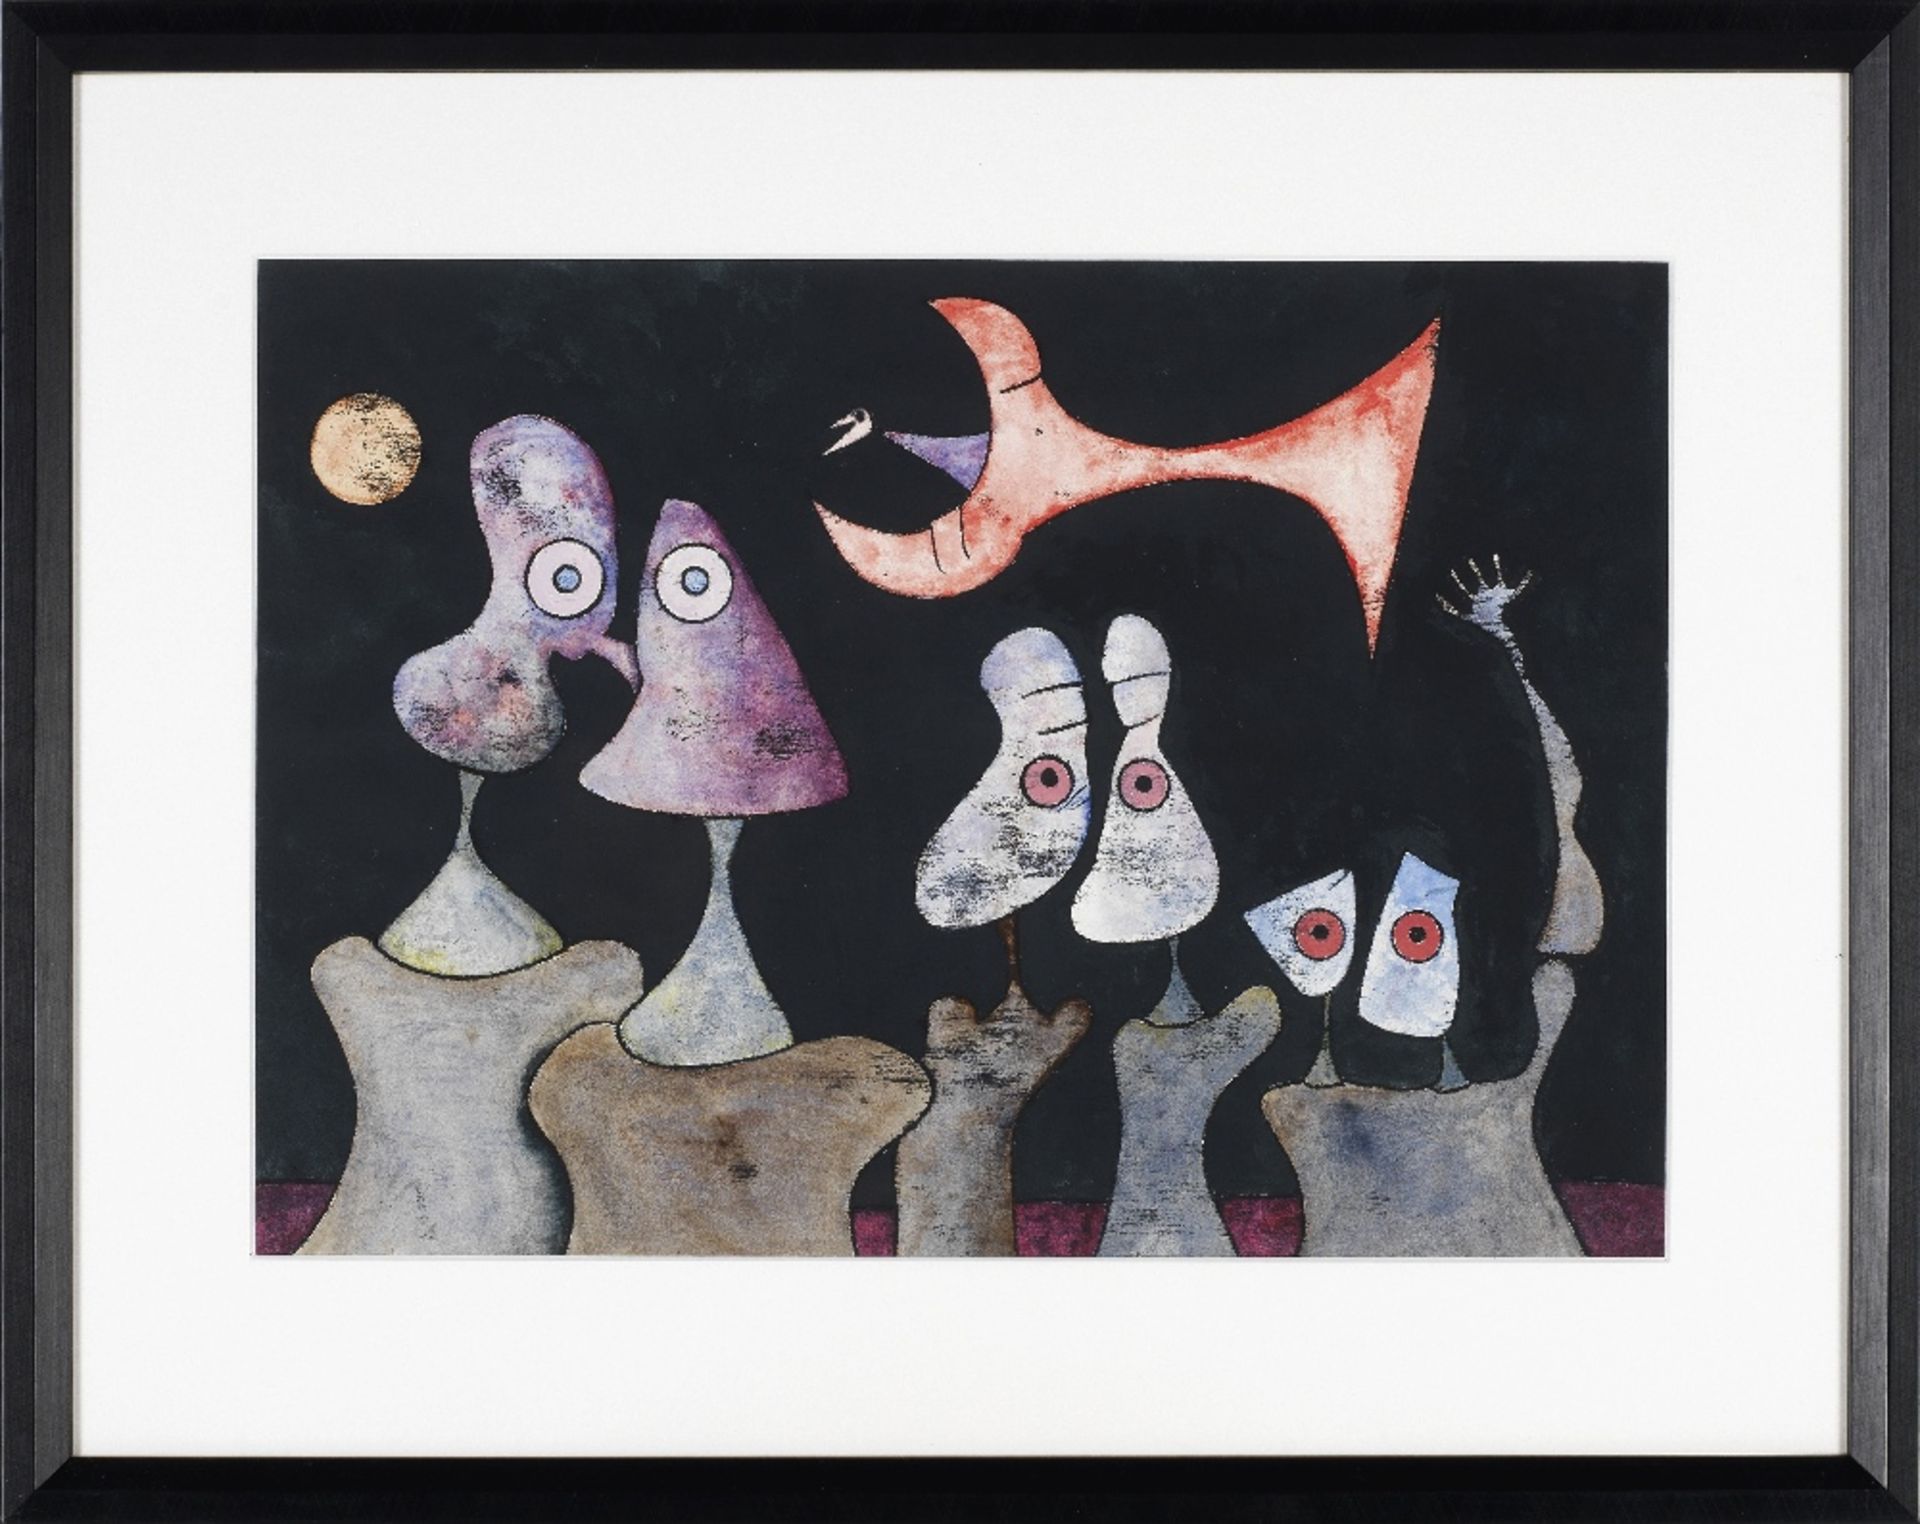 Desmond Morris (British, born 1928) The Party Goers (Completed 8 August 2008) - Image 2 of 3